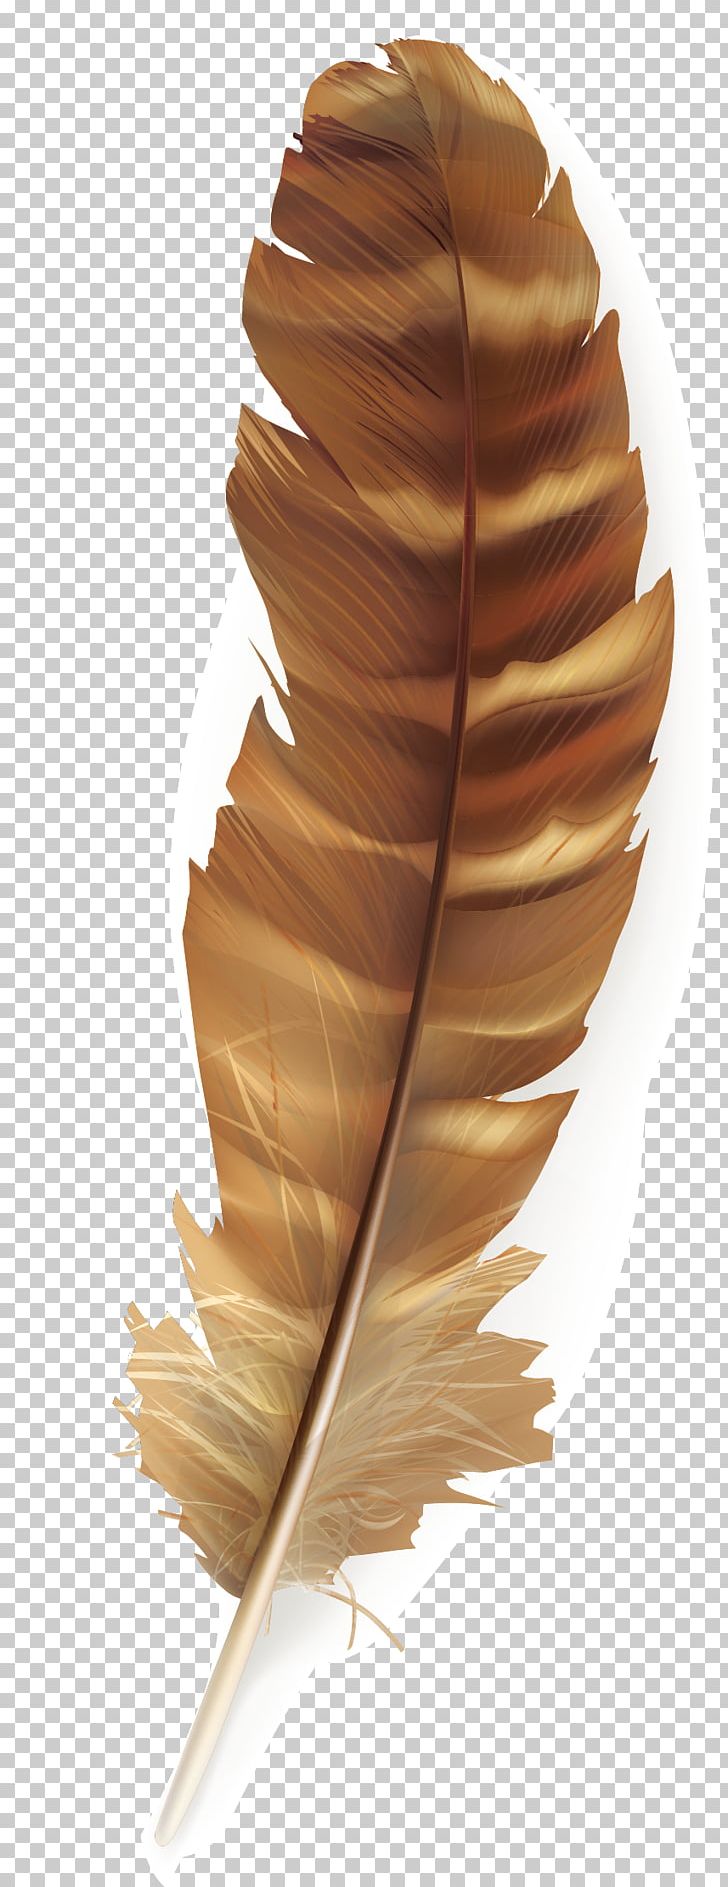 Brown Feathers PNG Image, Brown Animal Feather, Feather, Floating